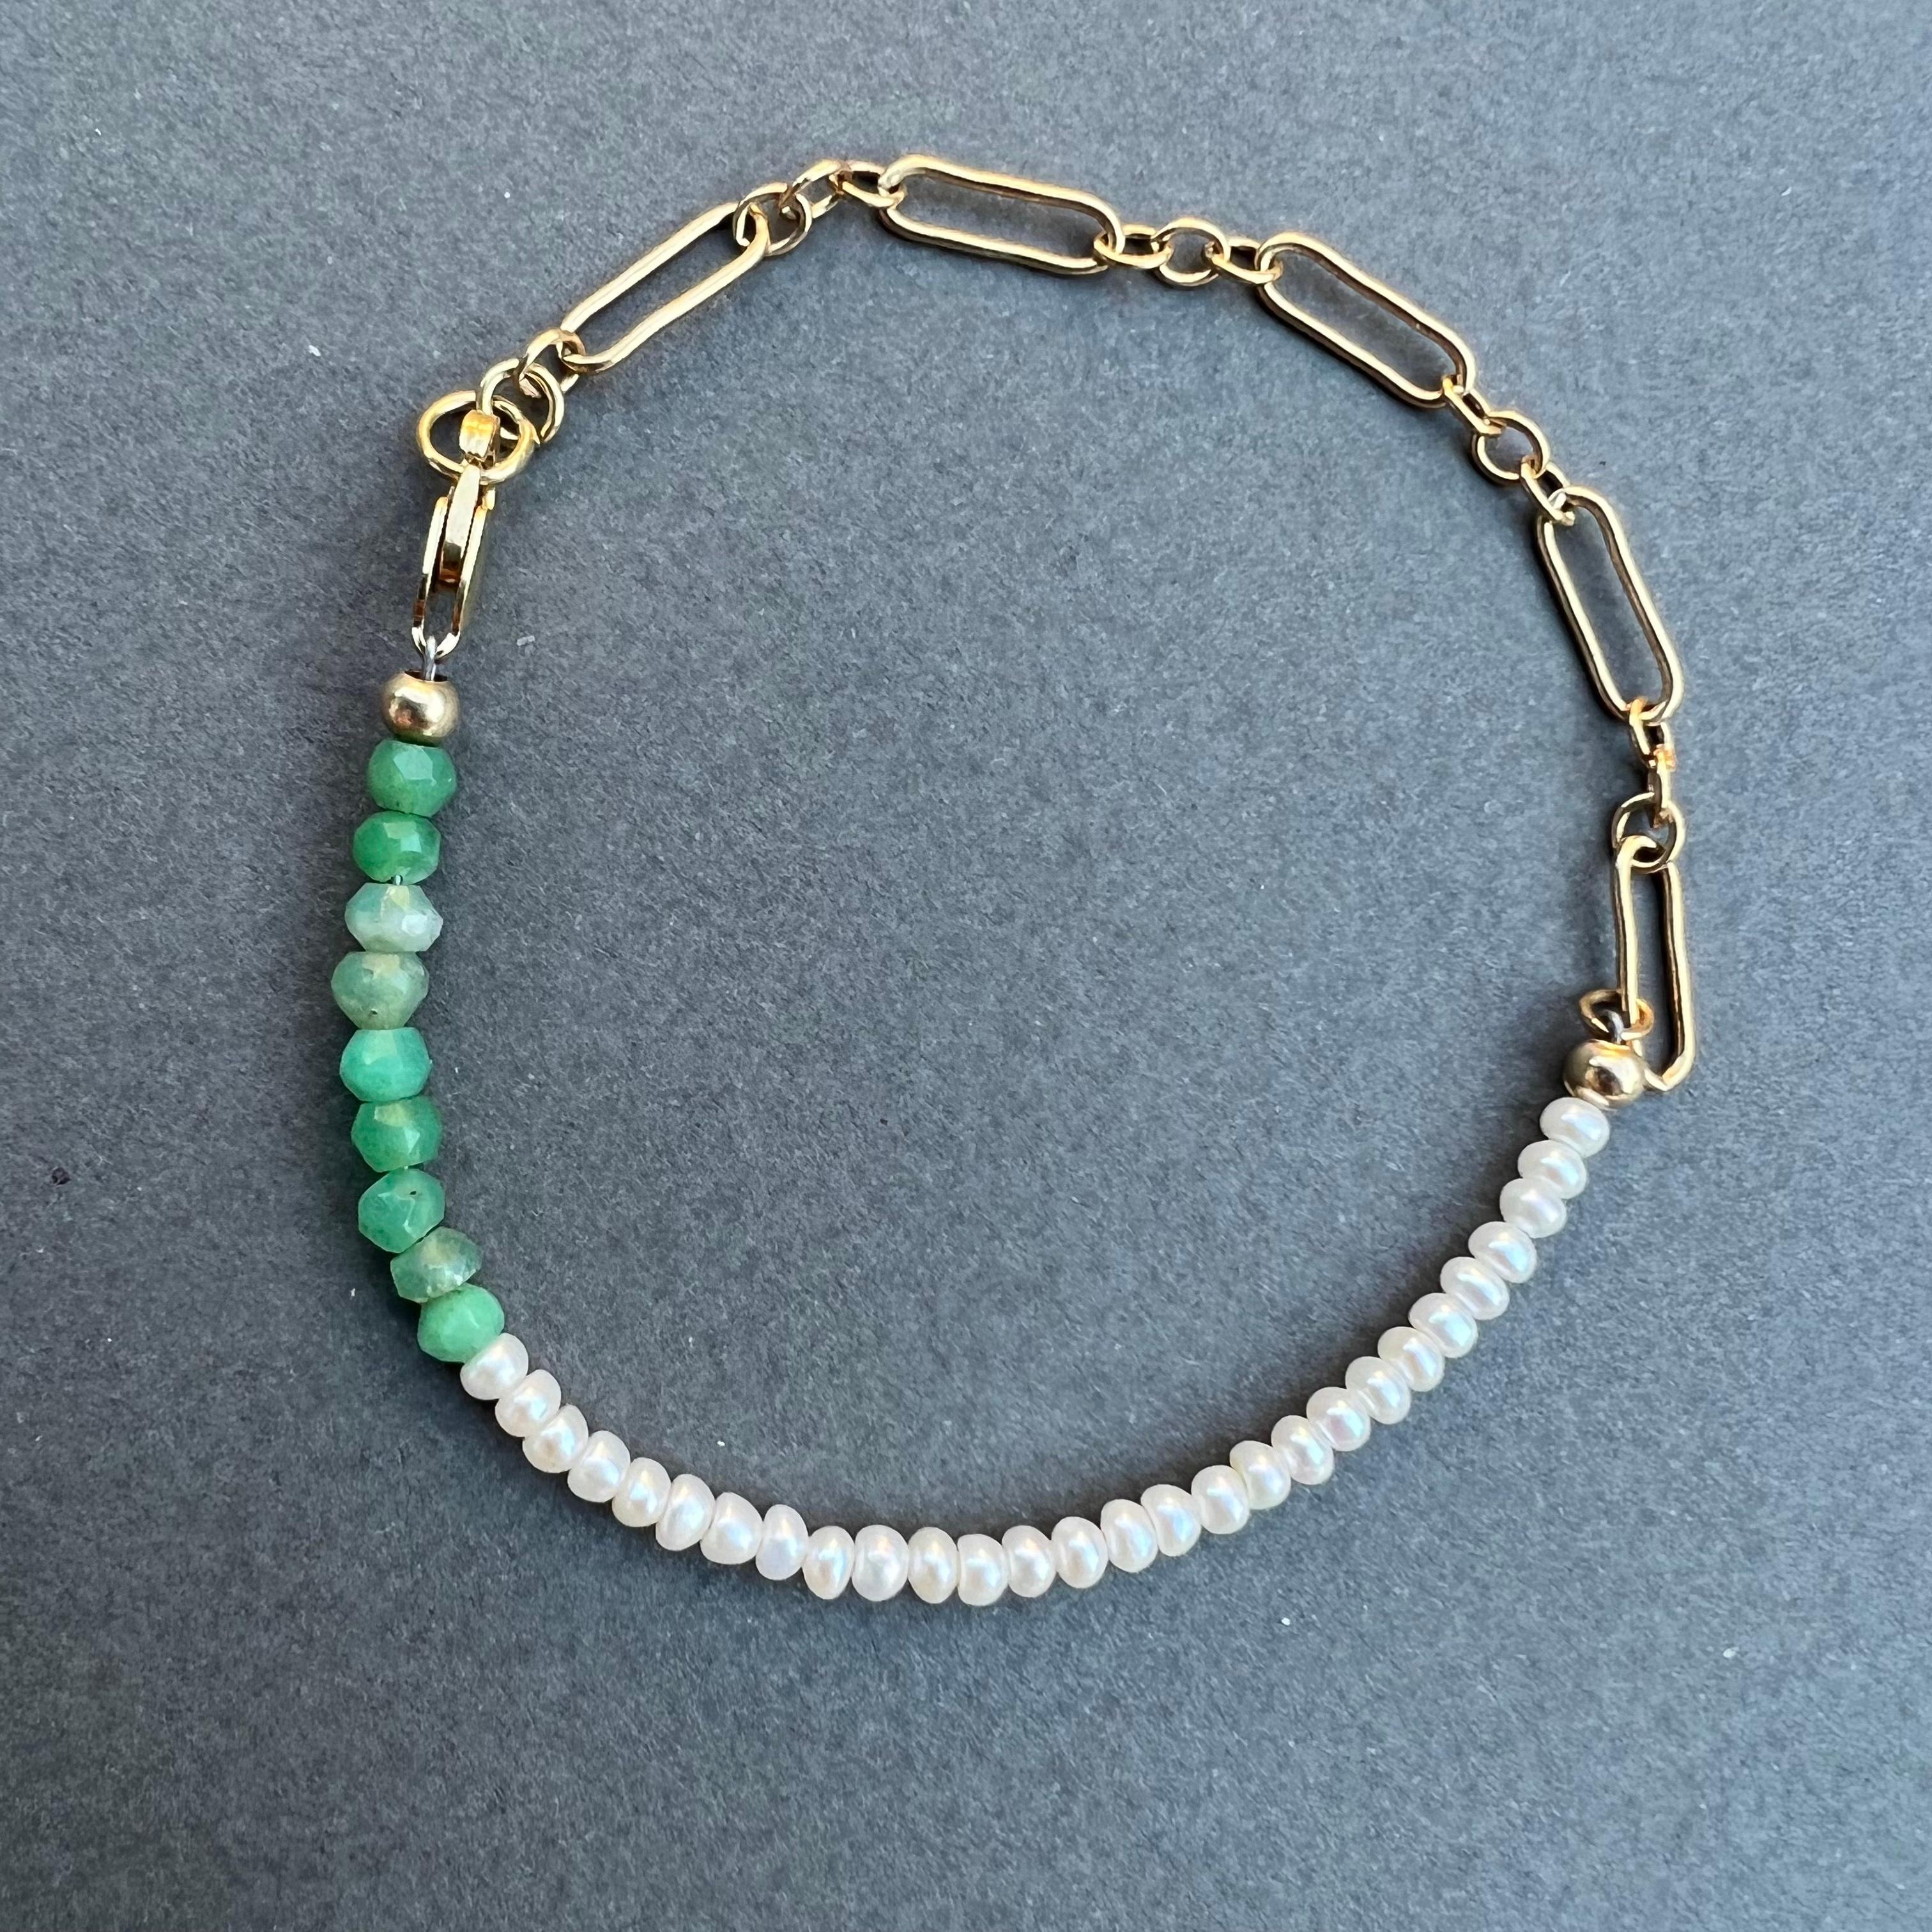 White Pearl Chrysoprase Bead Bracelet Gold Filled Chain J Dauphin In New Condition For Sale In Los Angeles, CA